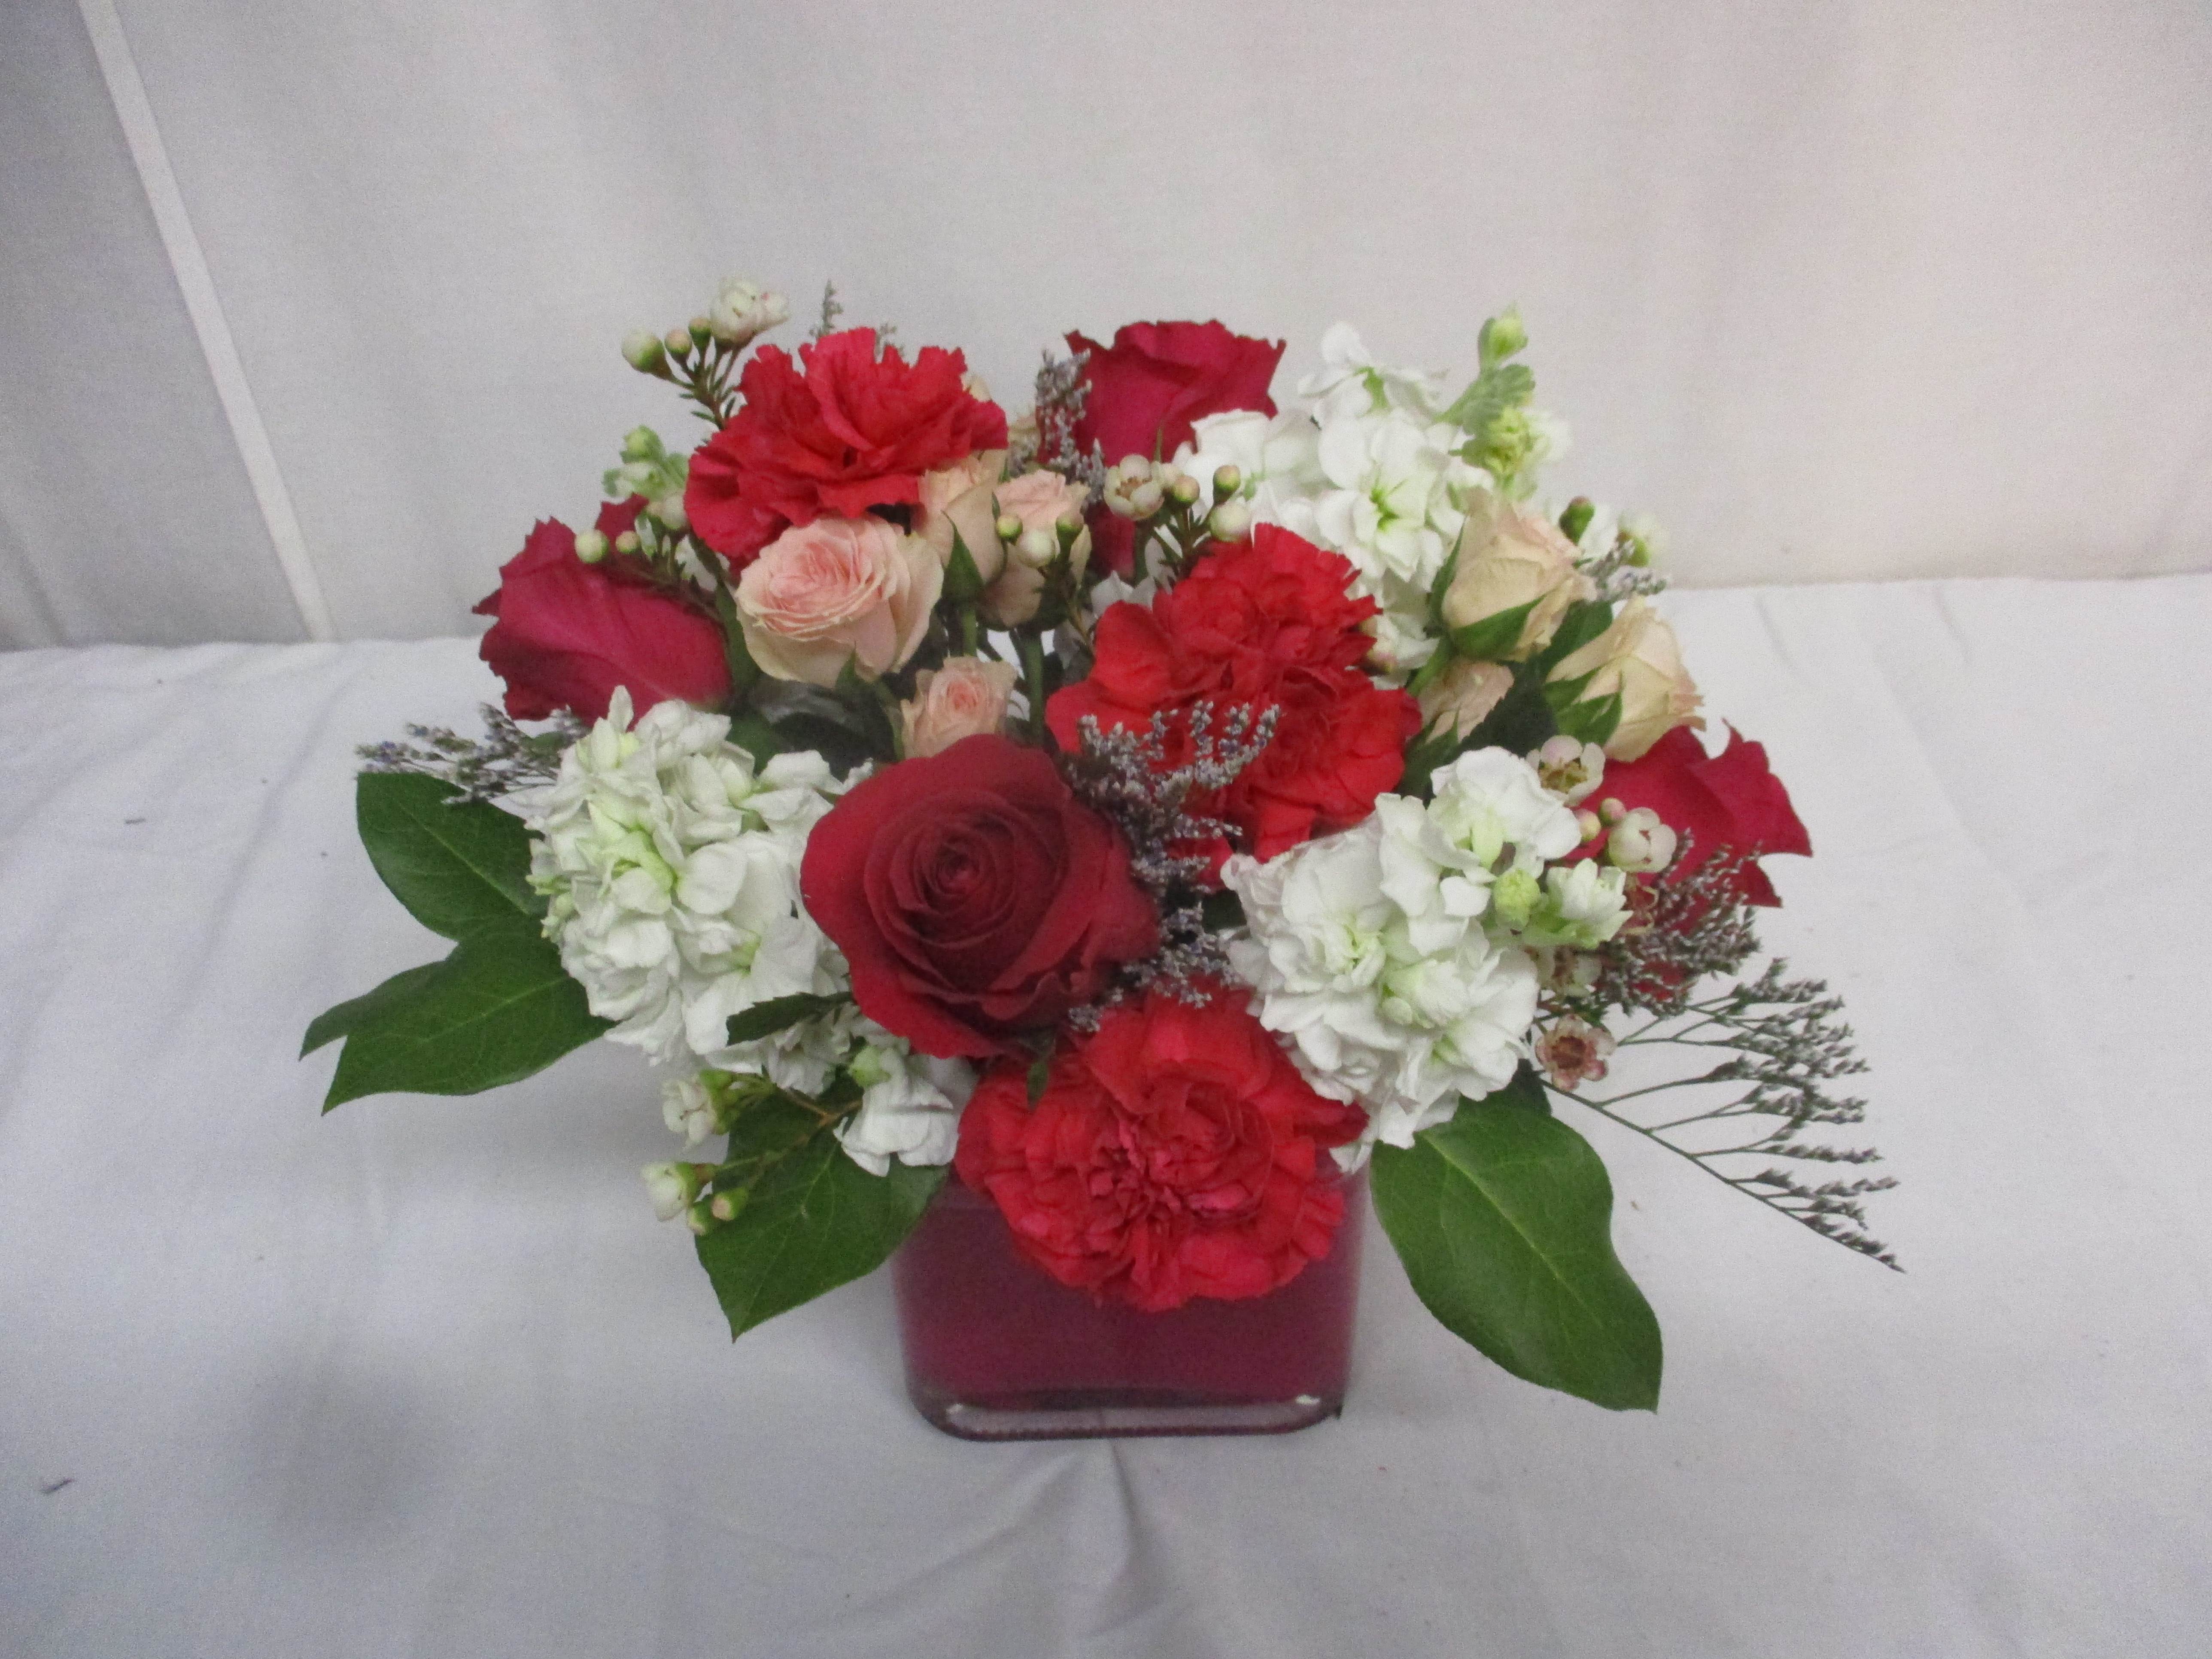 Cosmic Crush - This sweet arrangement features vibrant hot pink and light pink enhanced with refreshing white tones. A perfect way to send your love to someone close by, or across the miles.